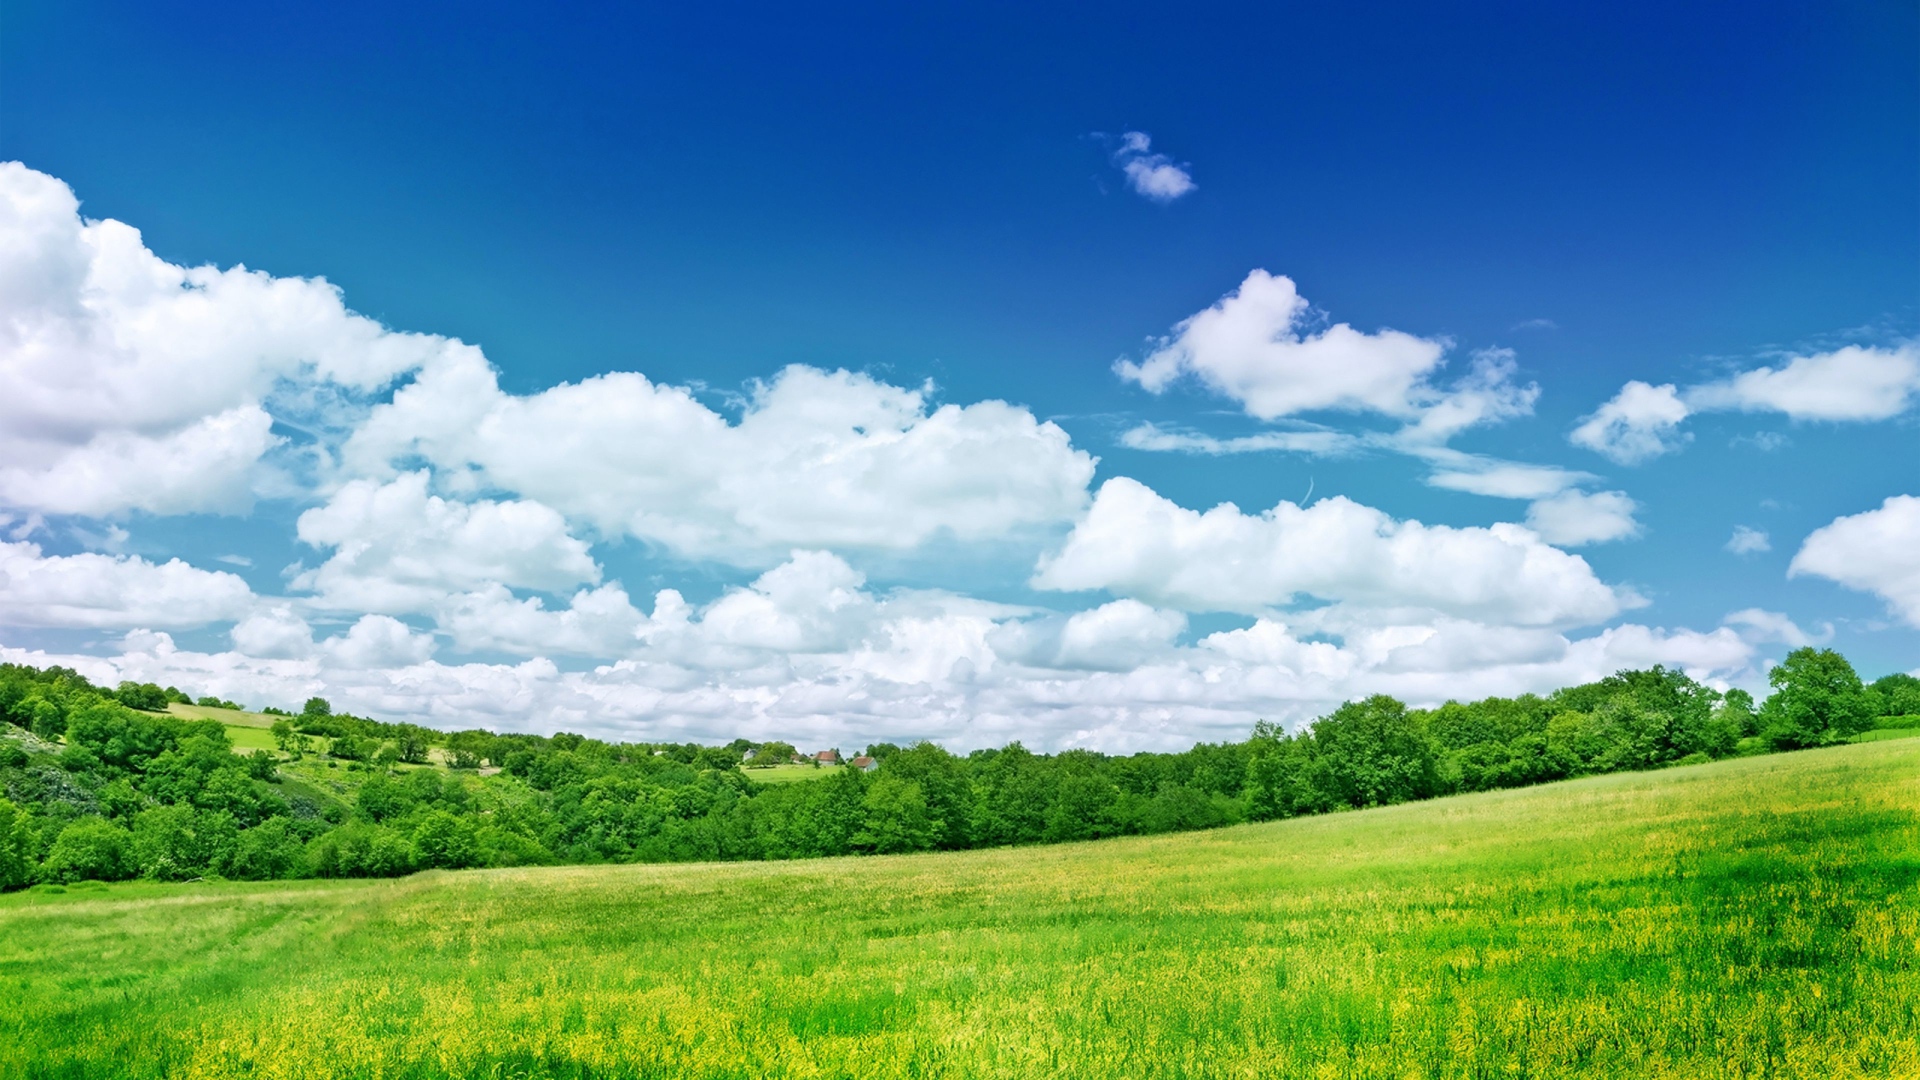 Blue sky with white clouds over green field